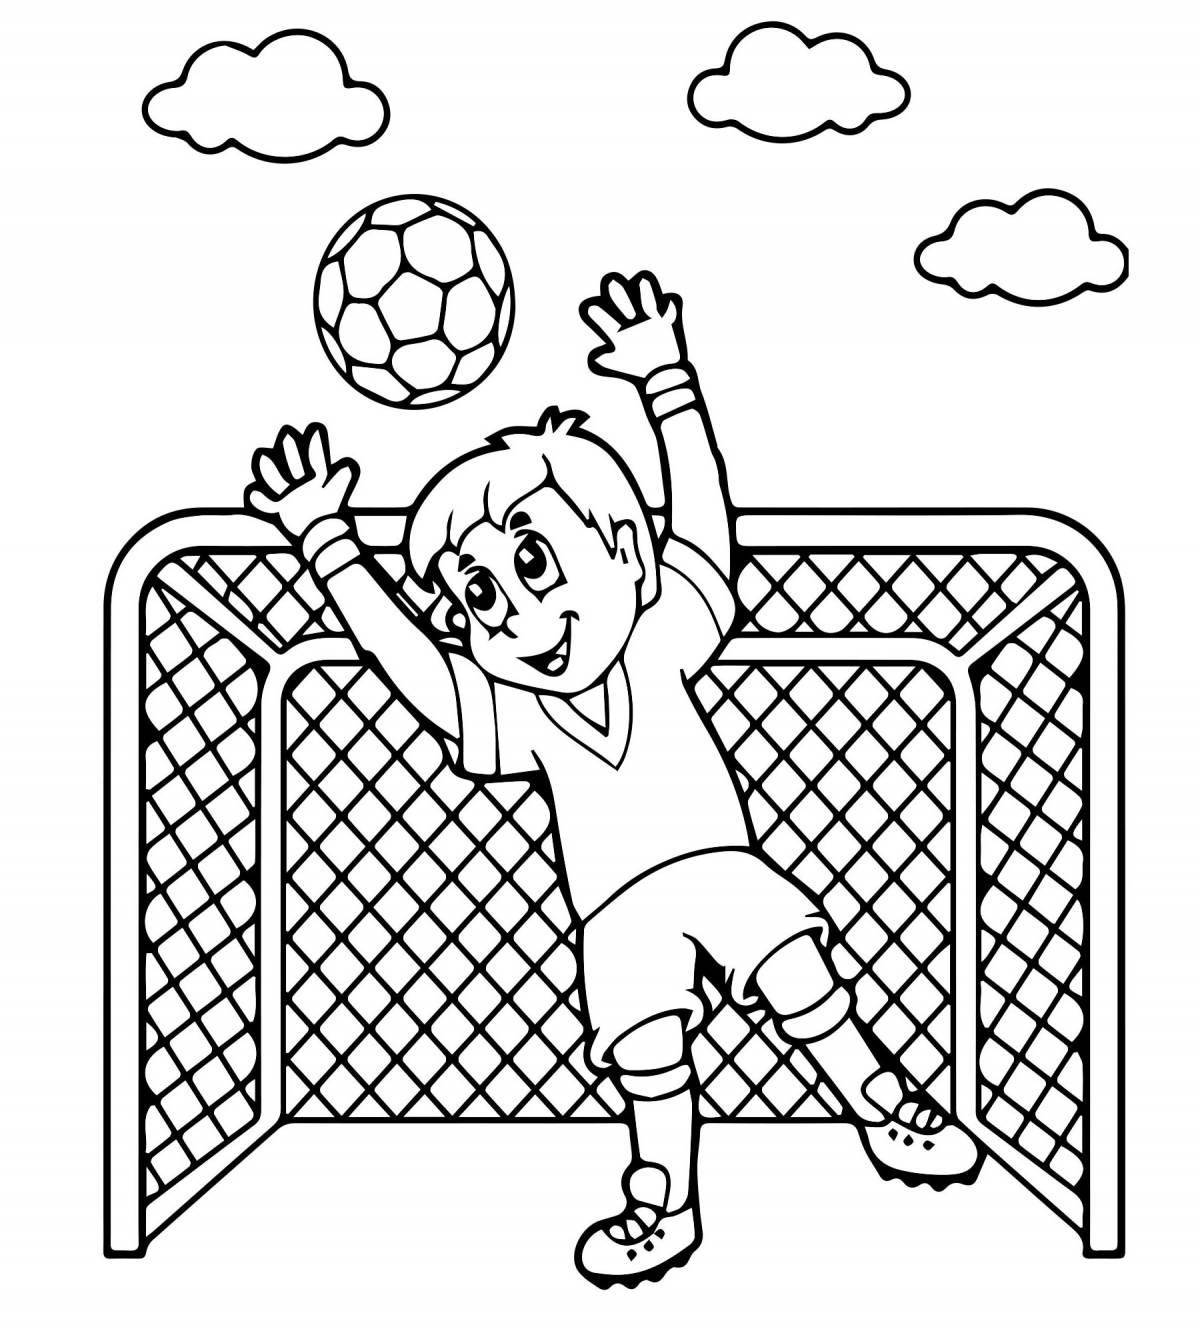 Animated boys football coloring page